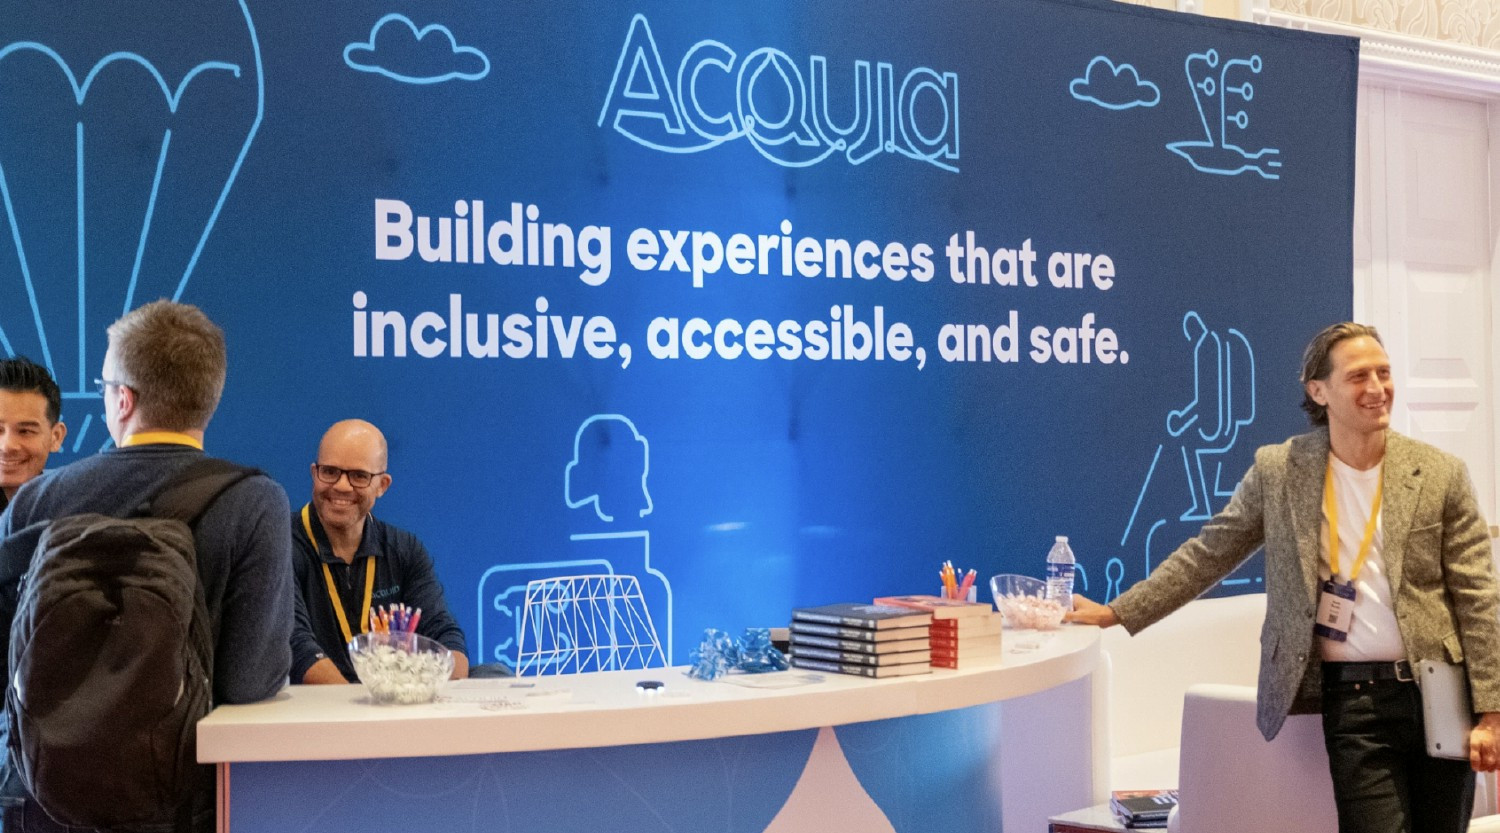 Acquia's Engage Booth 